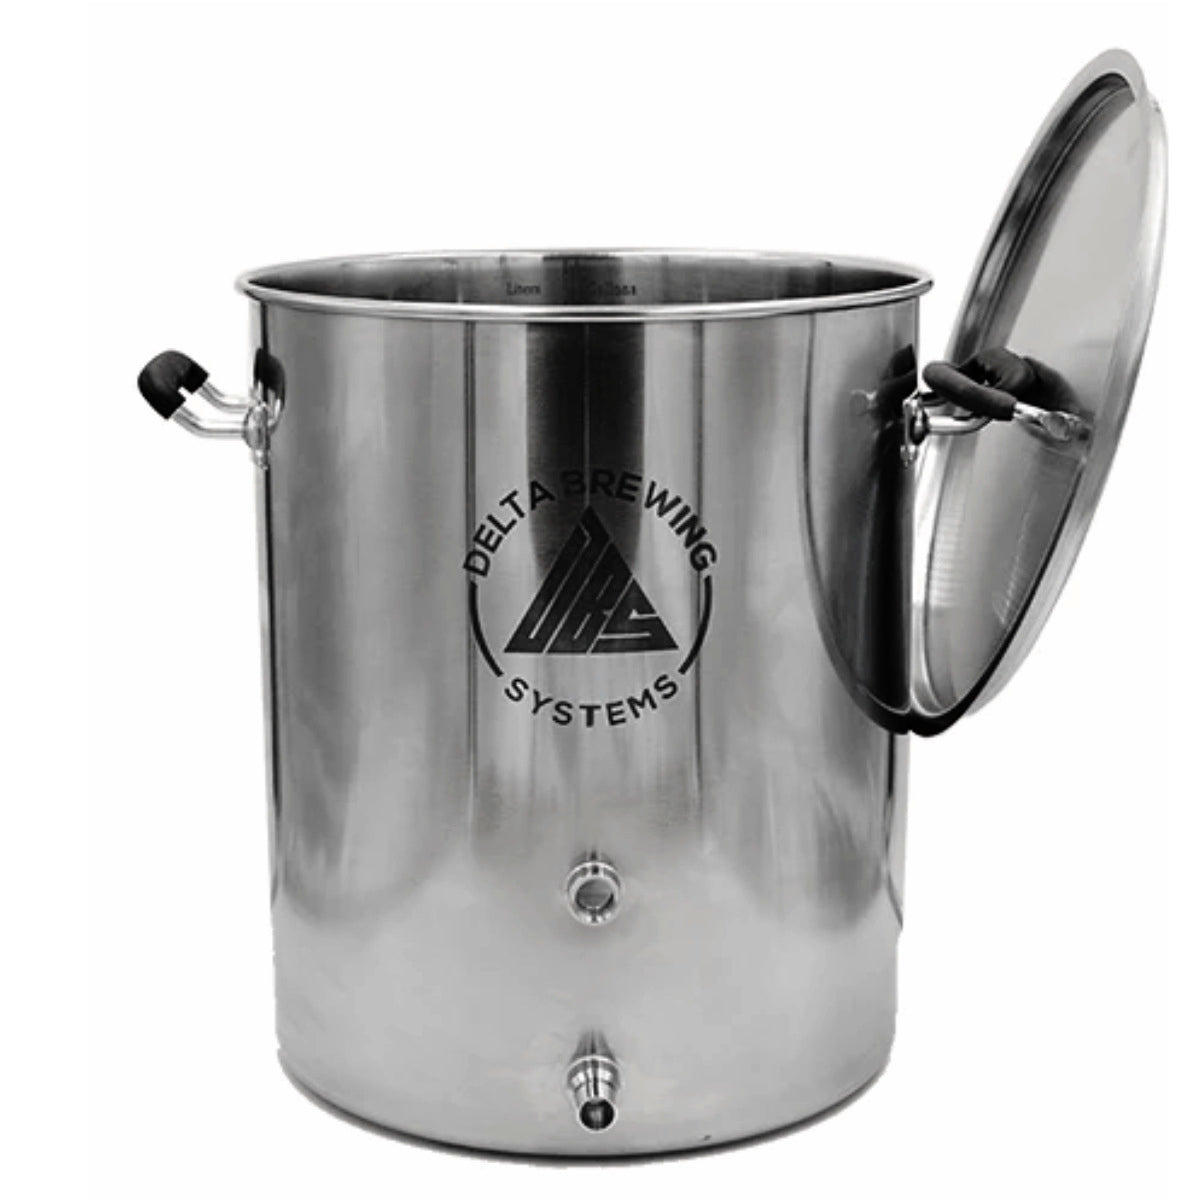 The Brew Kettle - 10 Gallon - Delta Brewing Systems